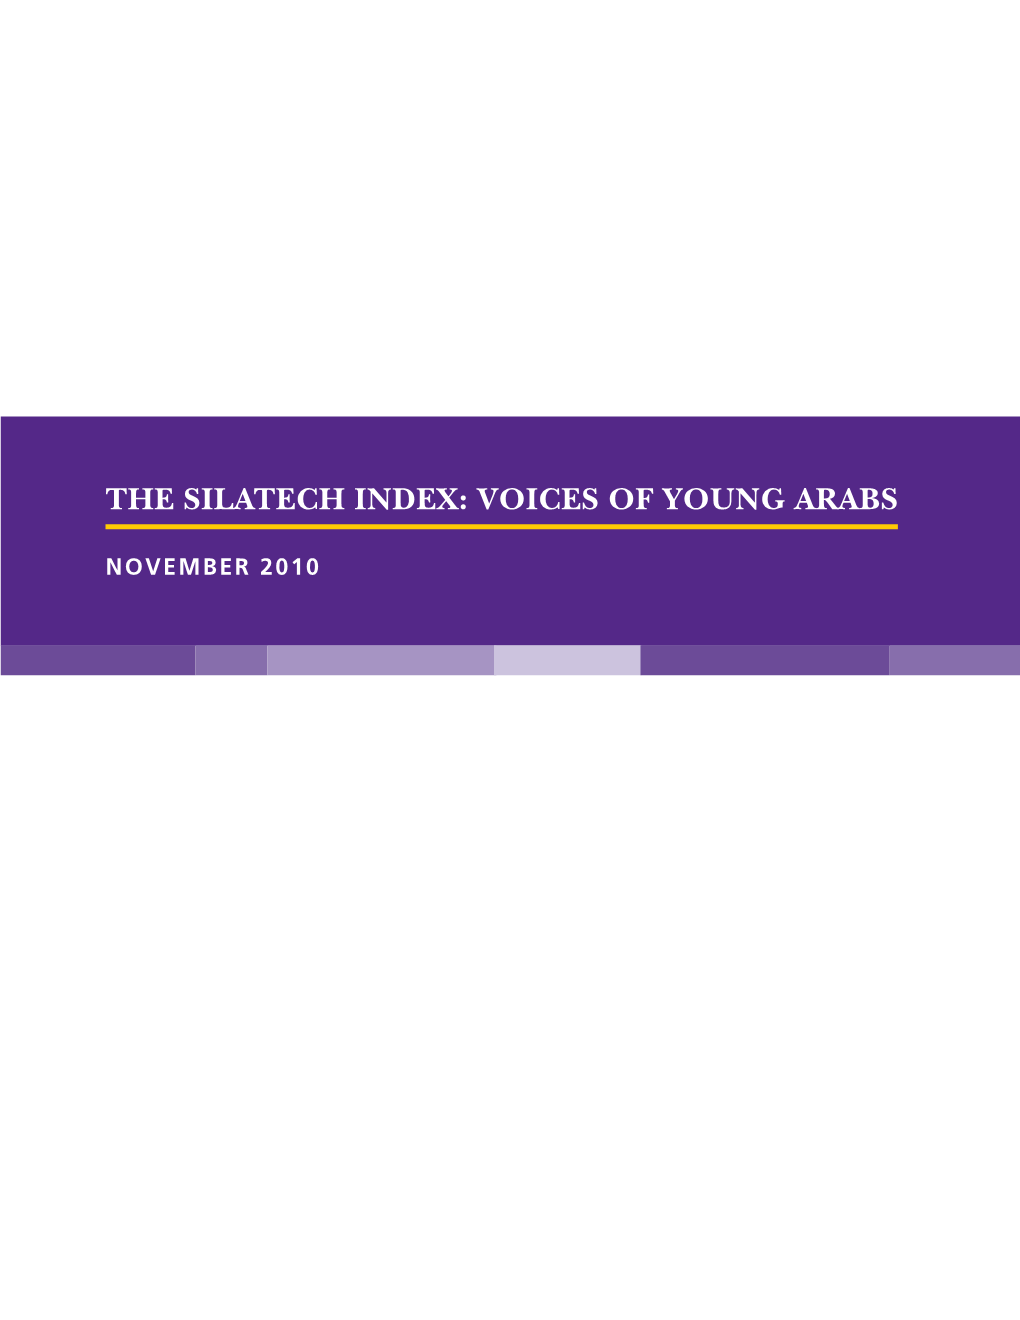 The Silatech Index: Voices of Young Arabs